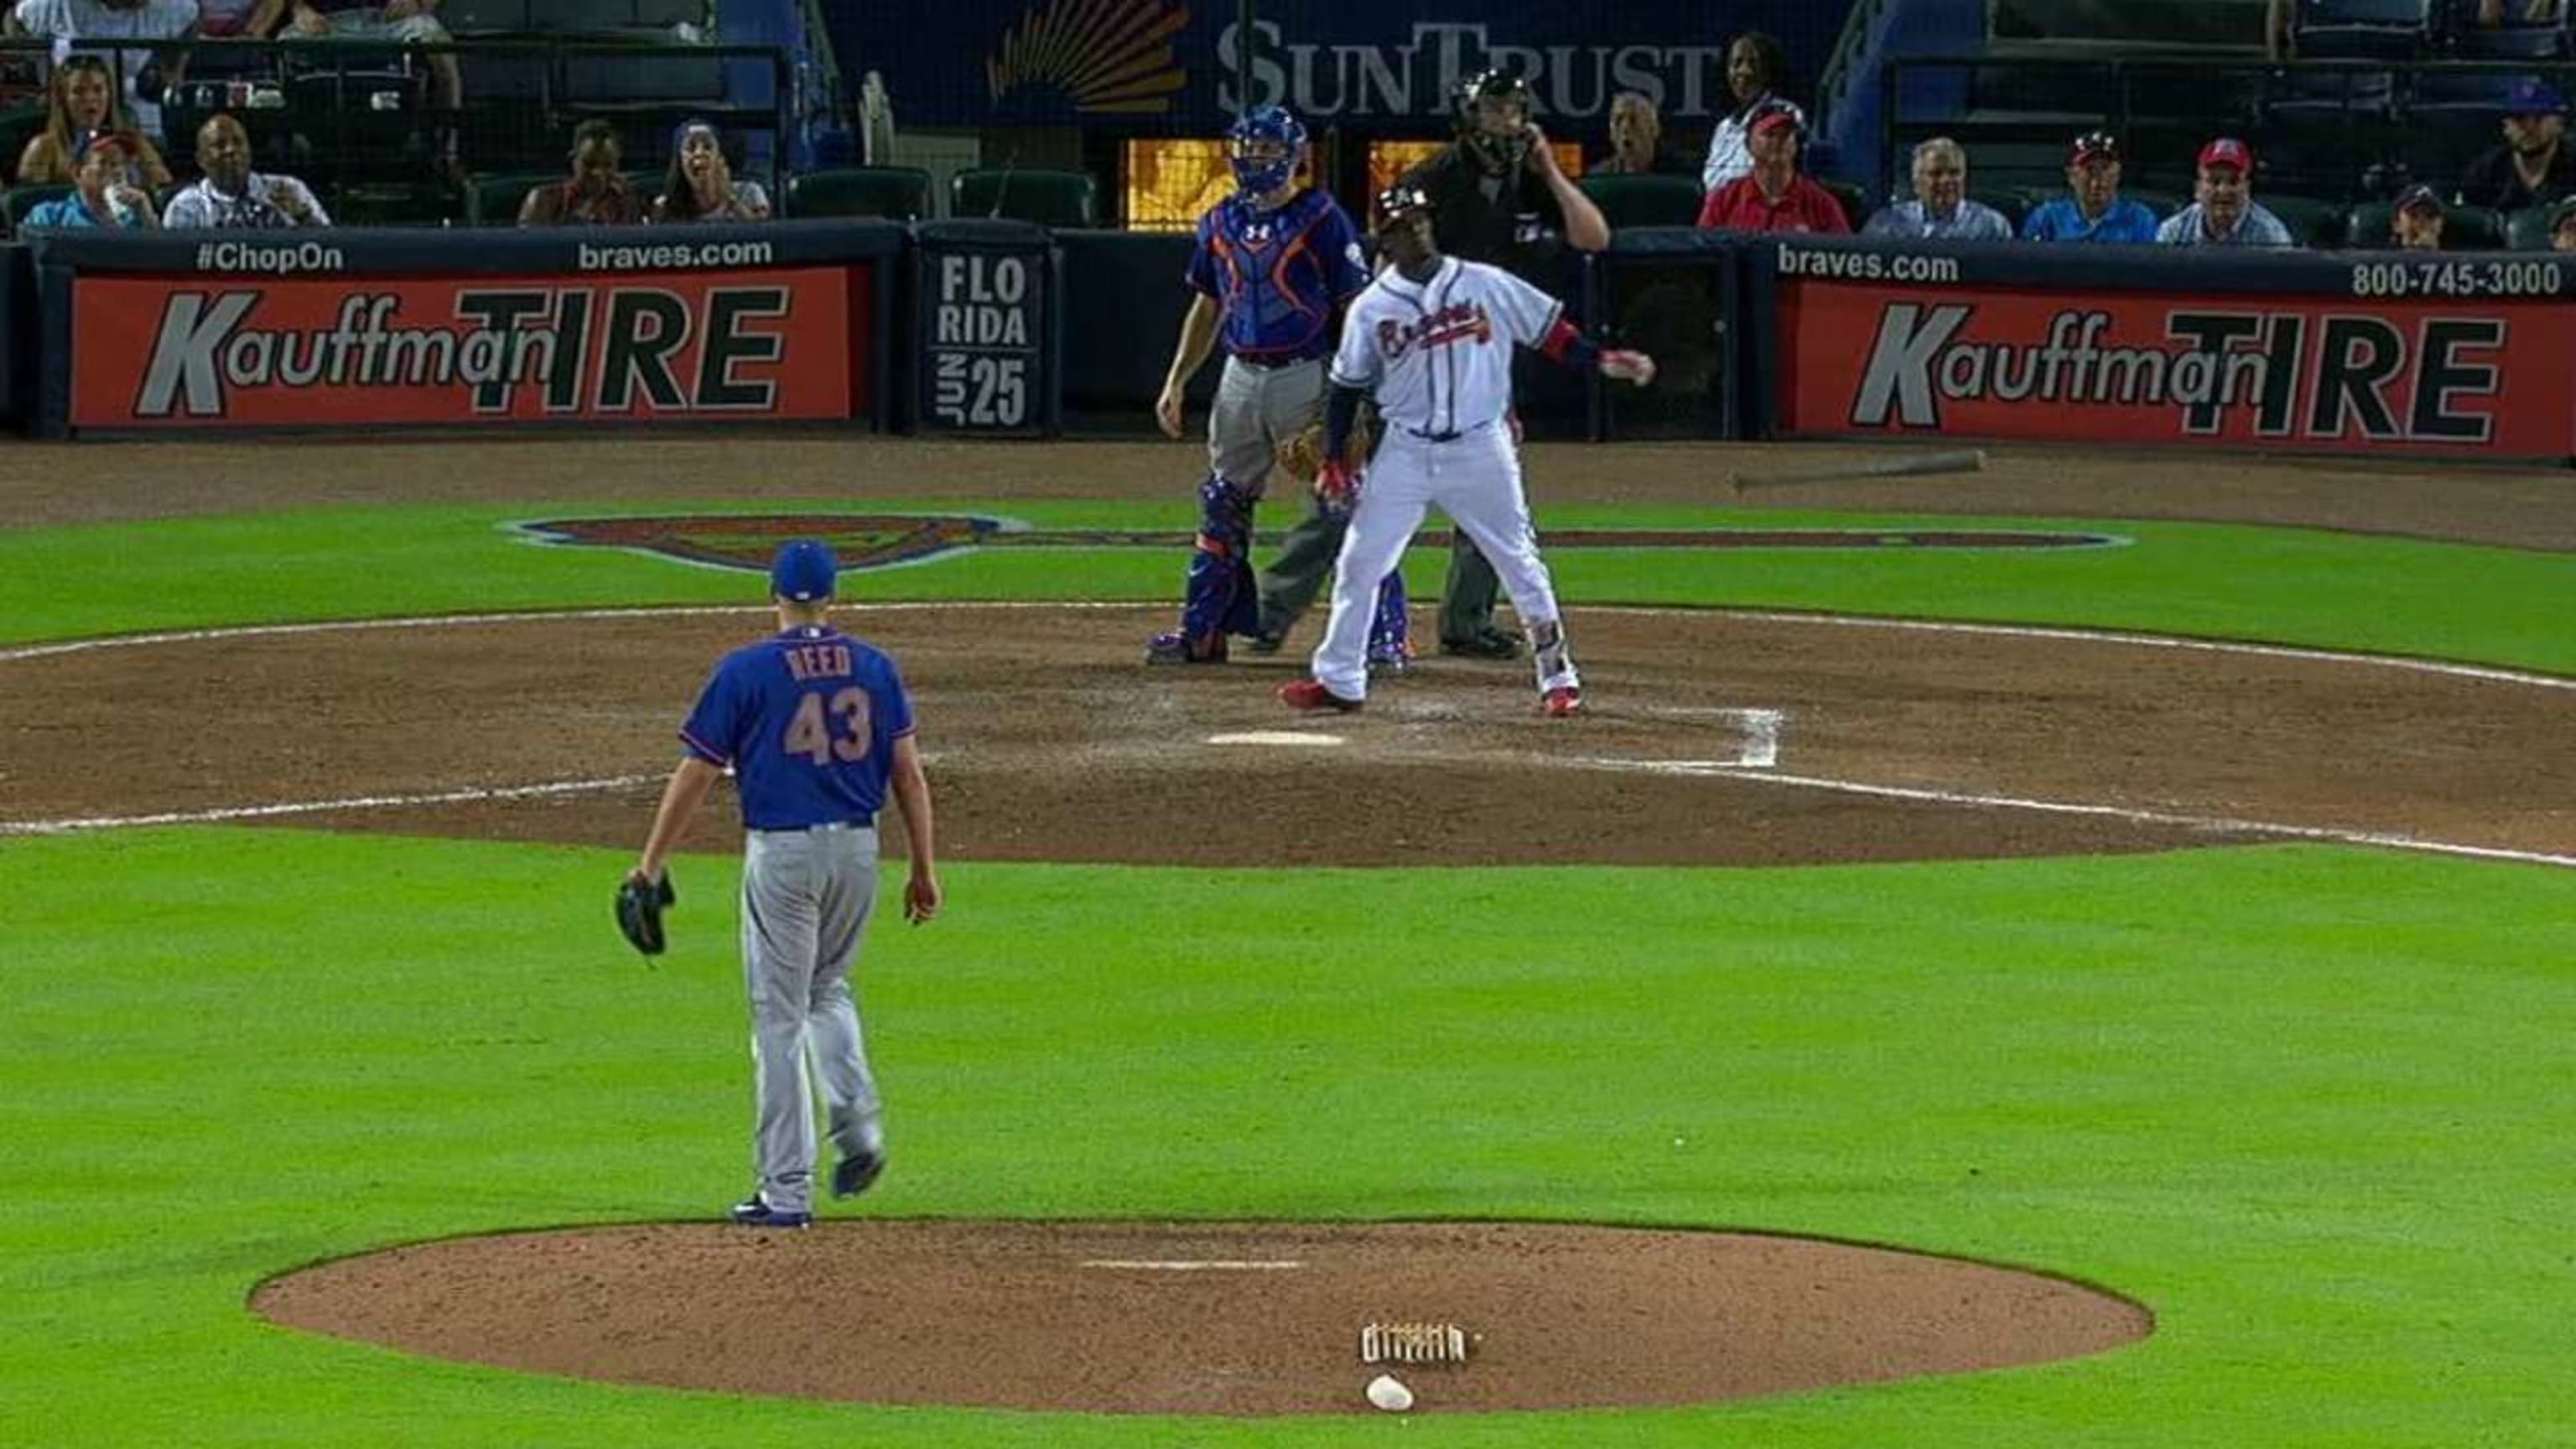 Braves' Brian Snitker ejected over challenge call vs. Royals